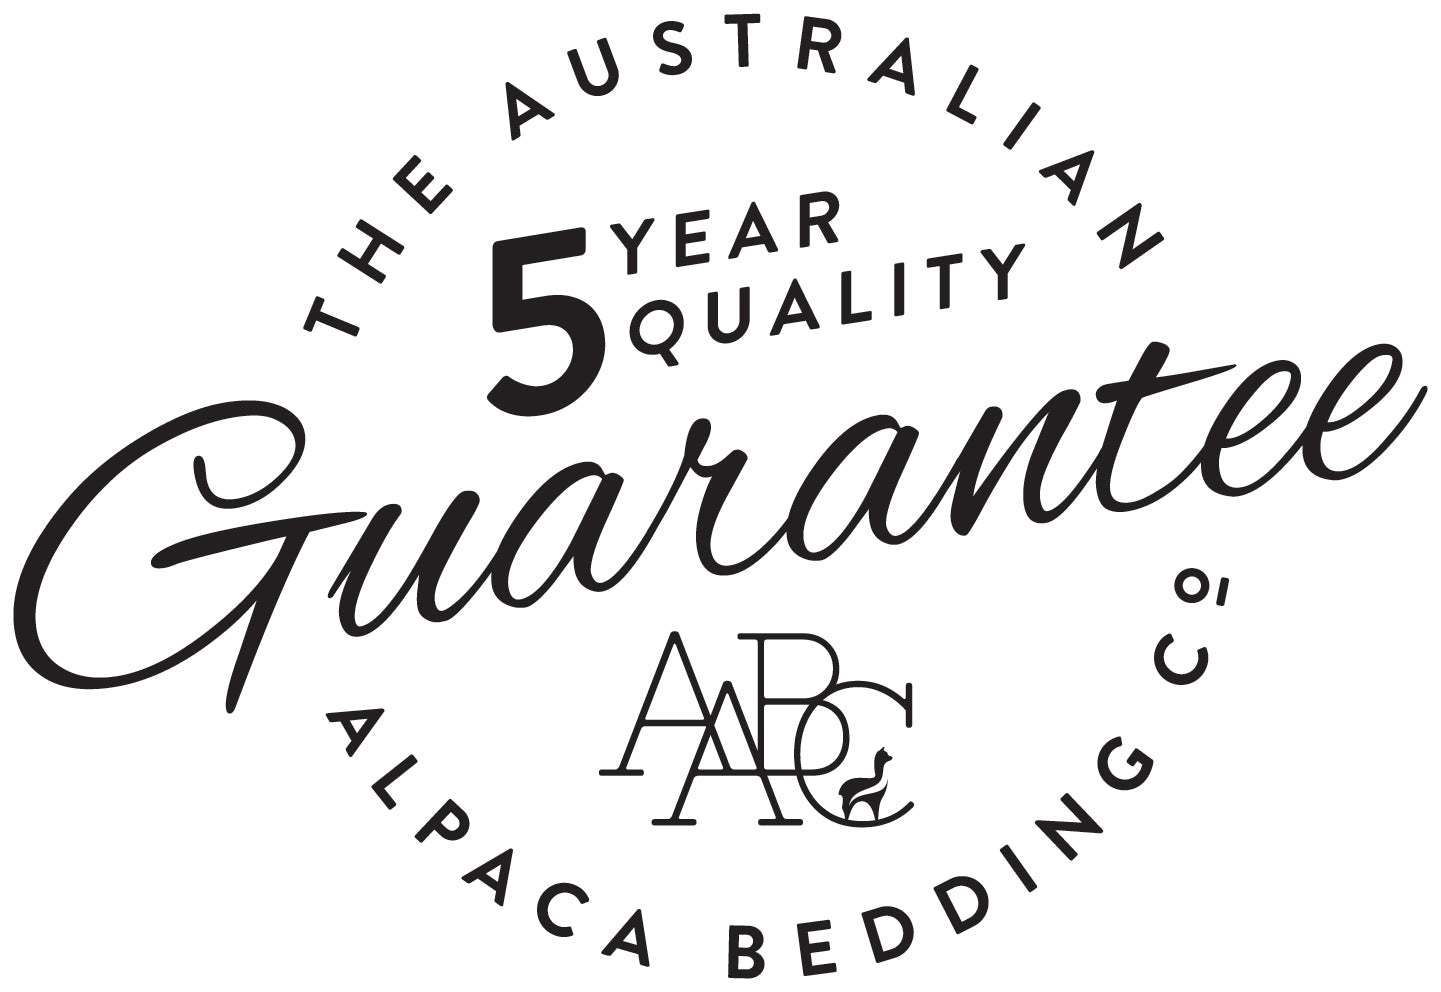 The Australian Alpaca Bedding Company quilts come with a five year quaity guarantee